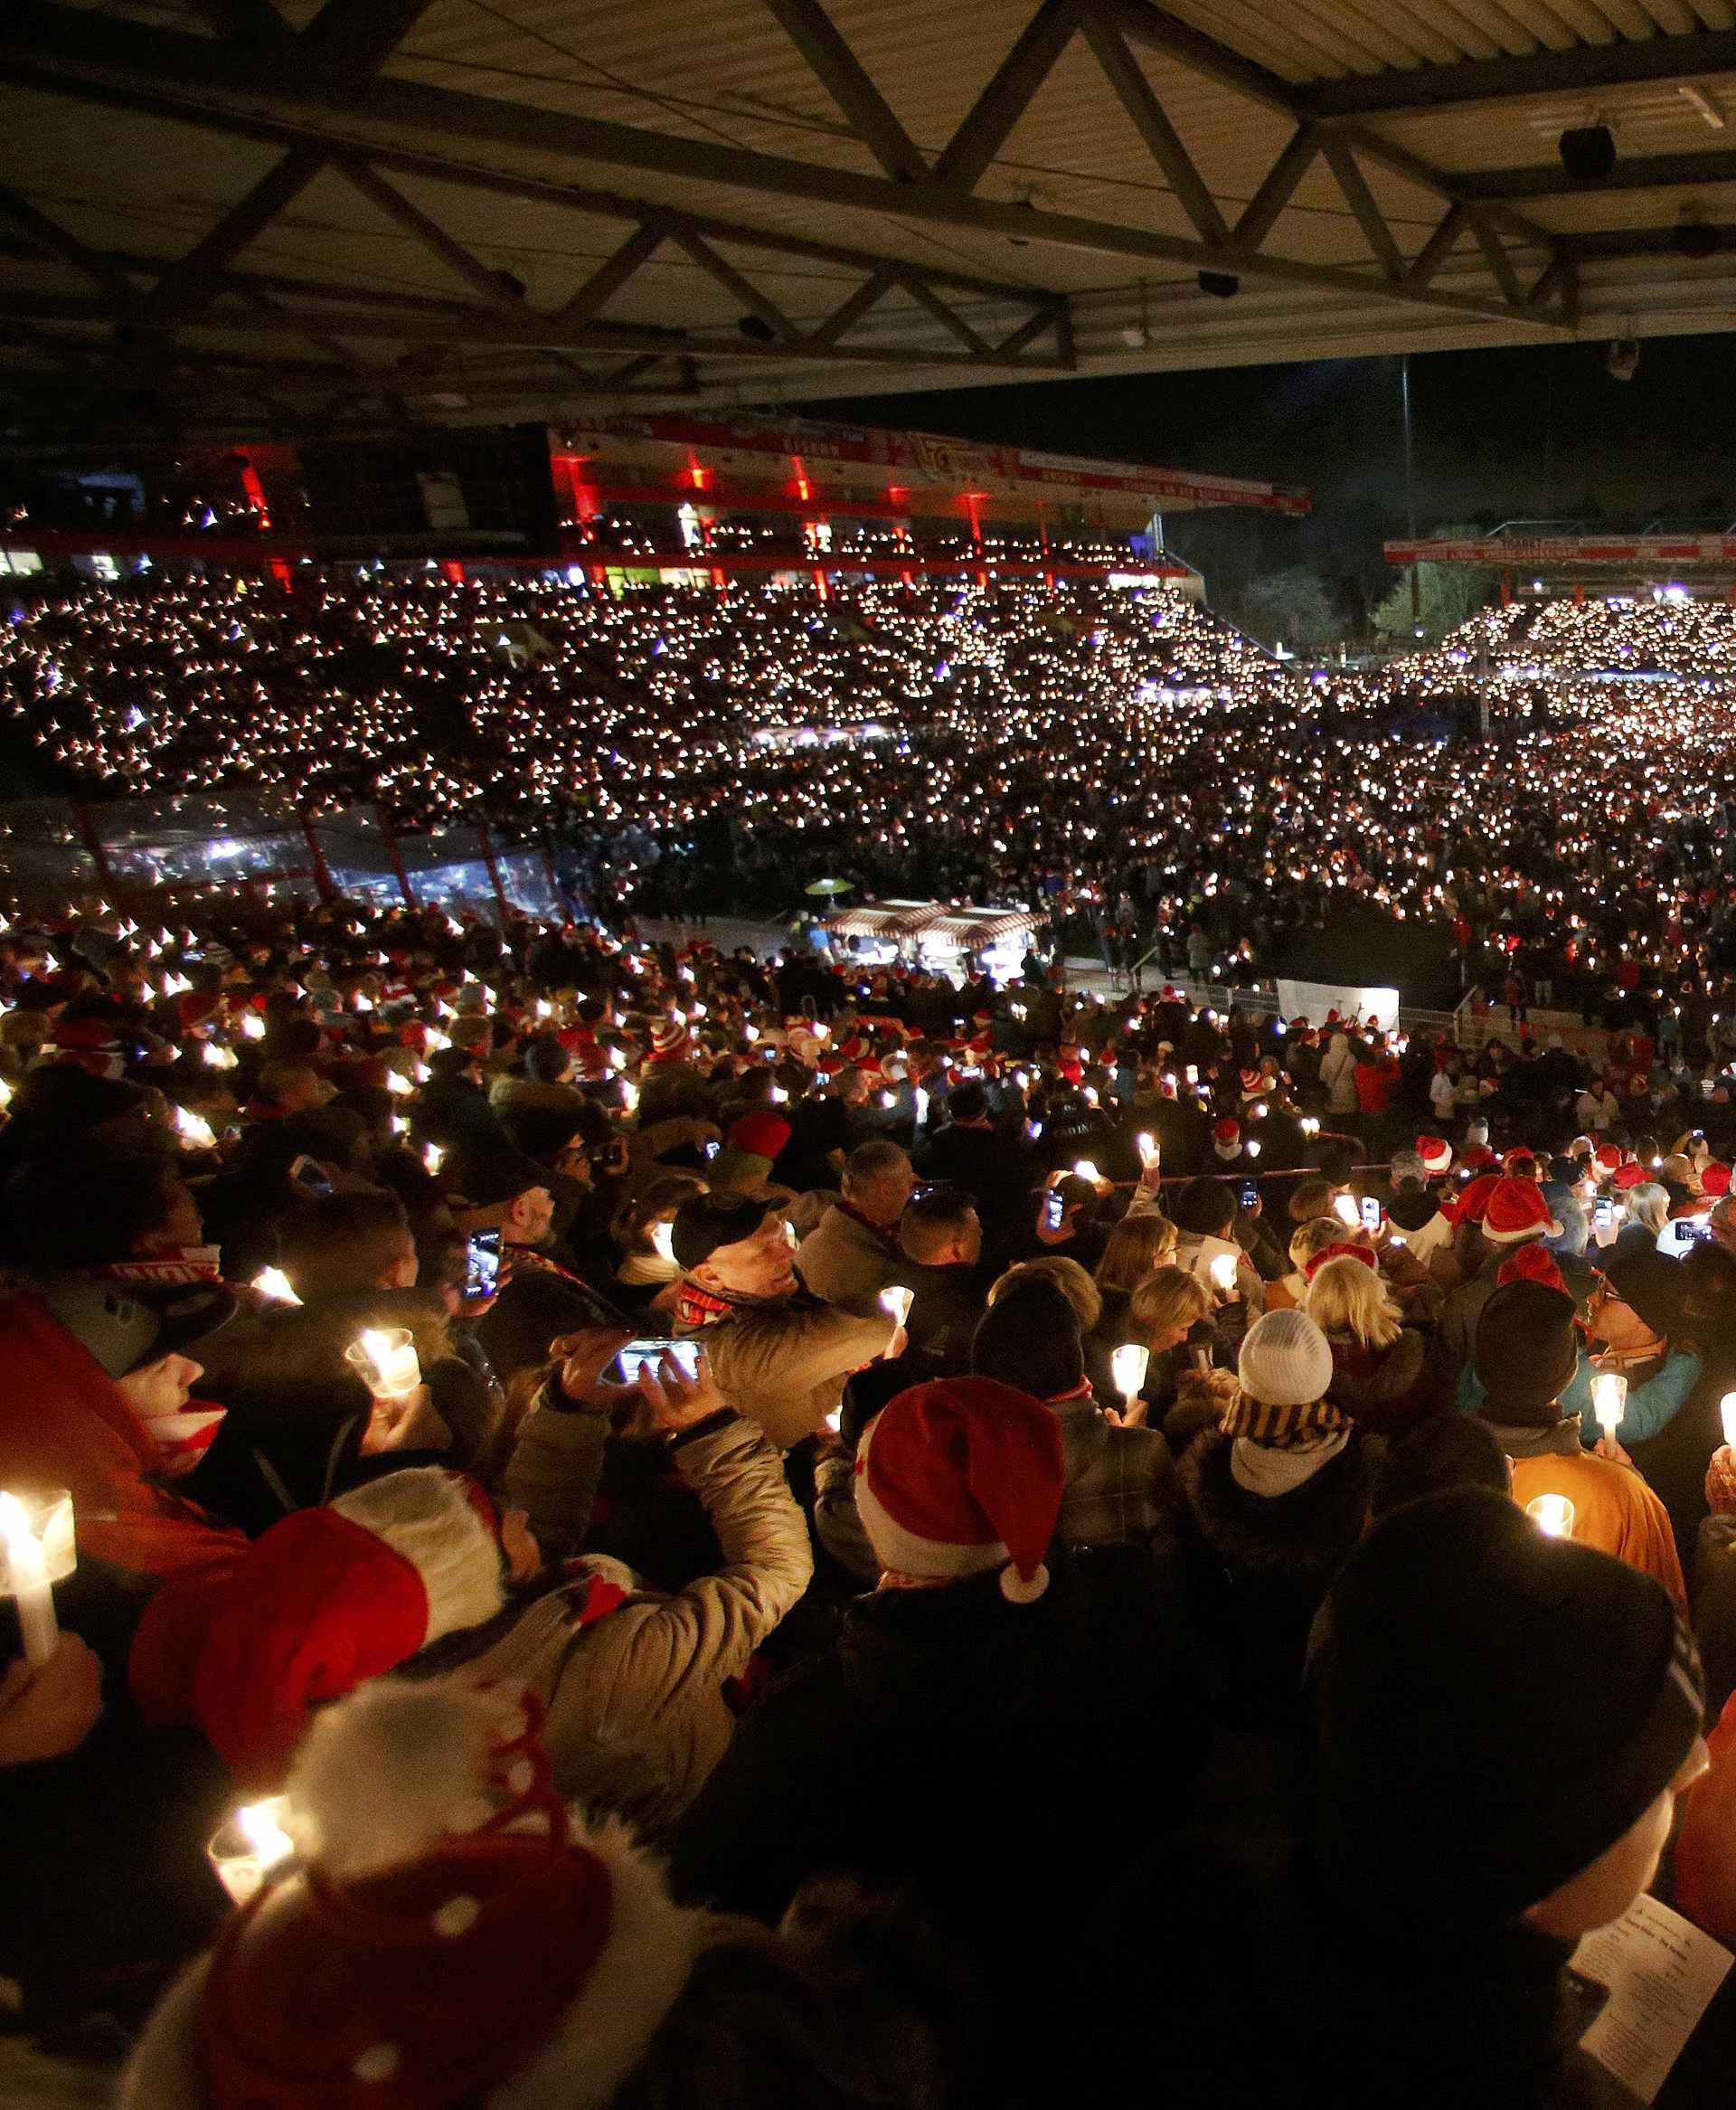 People attend the "Weihnachtssingen", a candle-lit carol concert at the Alte Foersterei stadium in Berlin